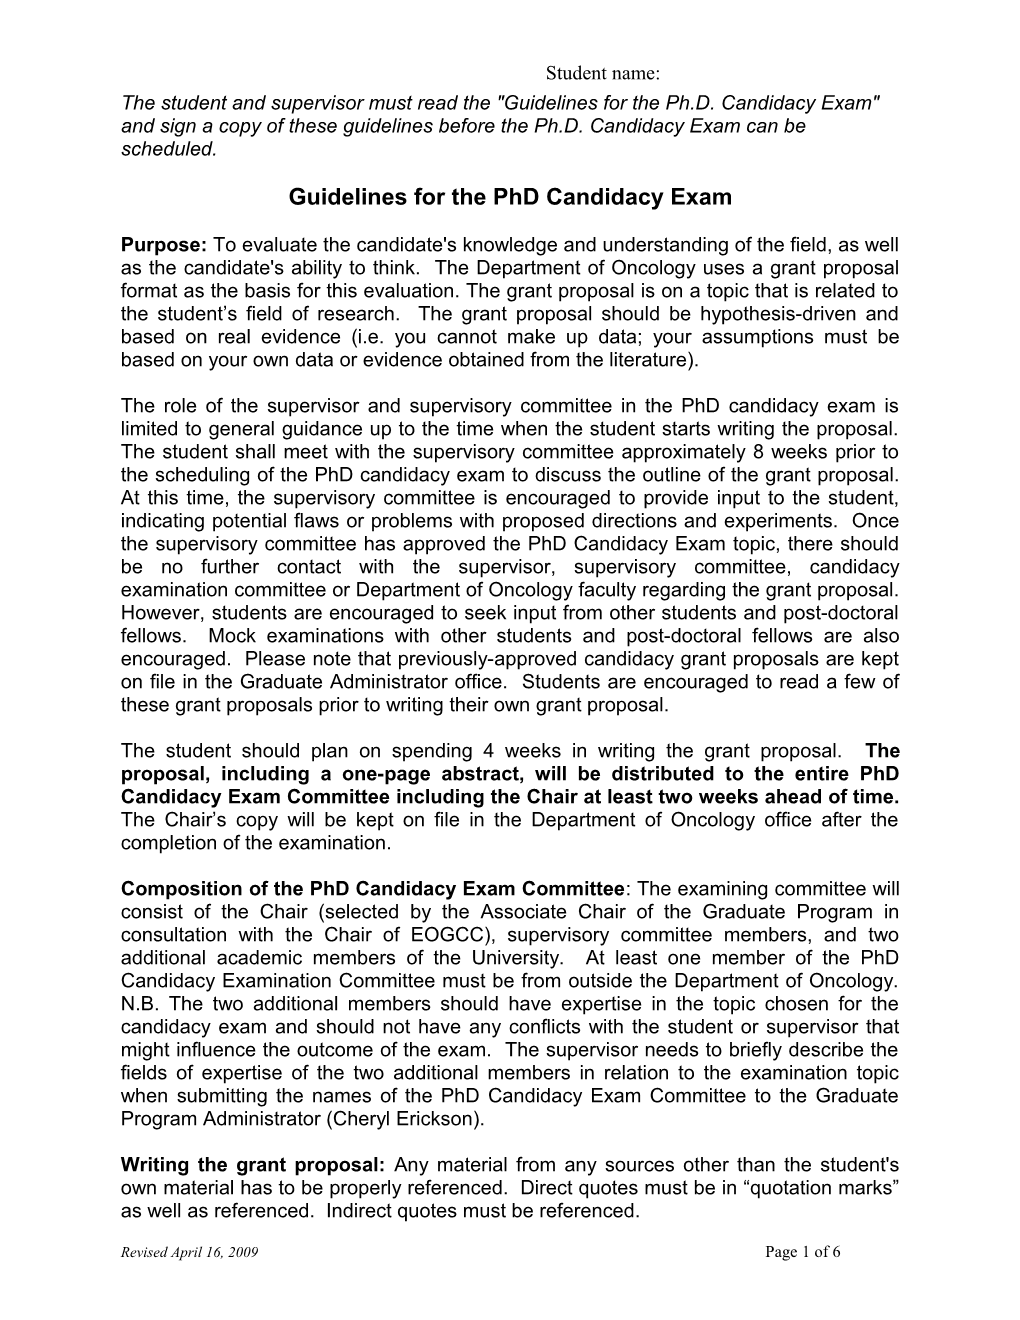 Guidelines for the Phd Candidacy Exam